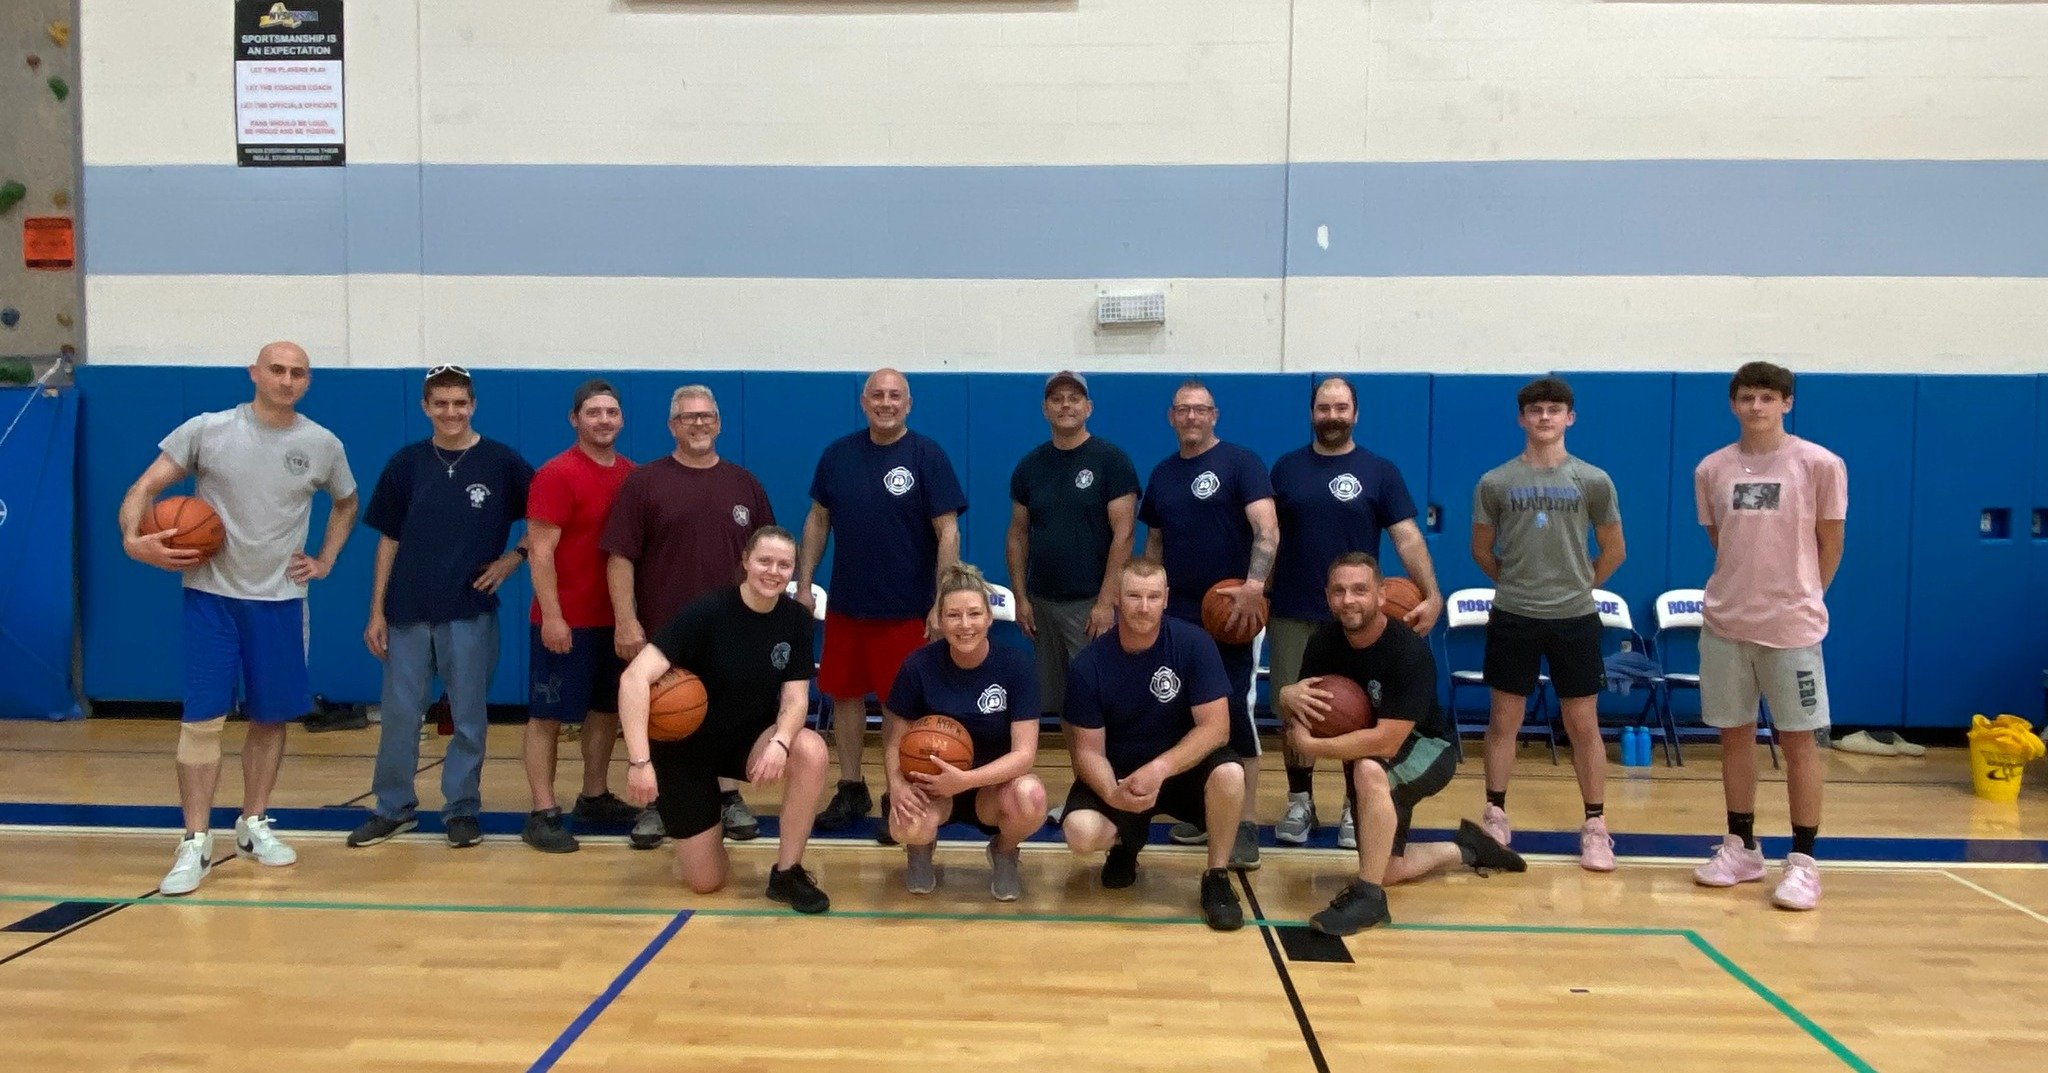 🚒It's #FireDepartmentFriday! 

🏉This week, our departments indeed went above and beyond! From dodgeball and football to litter cleanups and yoga, the competition among Sullivan County firefighters to be named the Healthiest Fire Department is heati